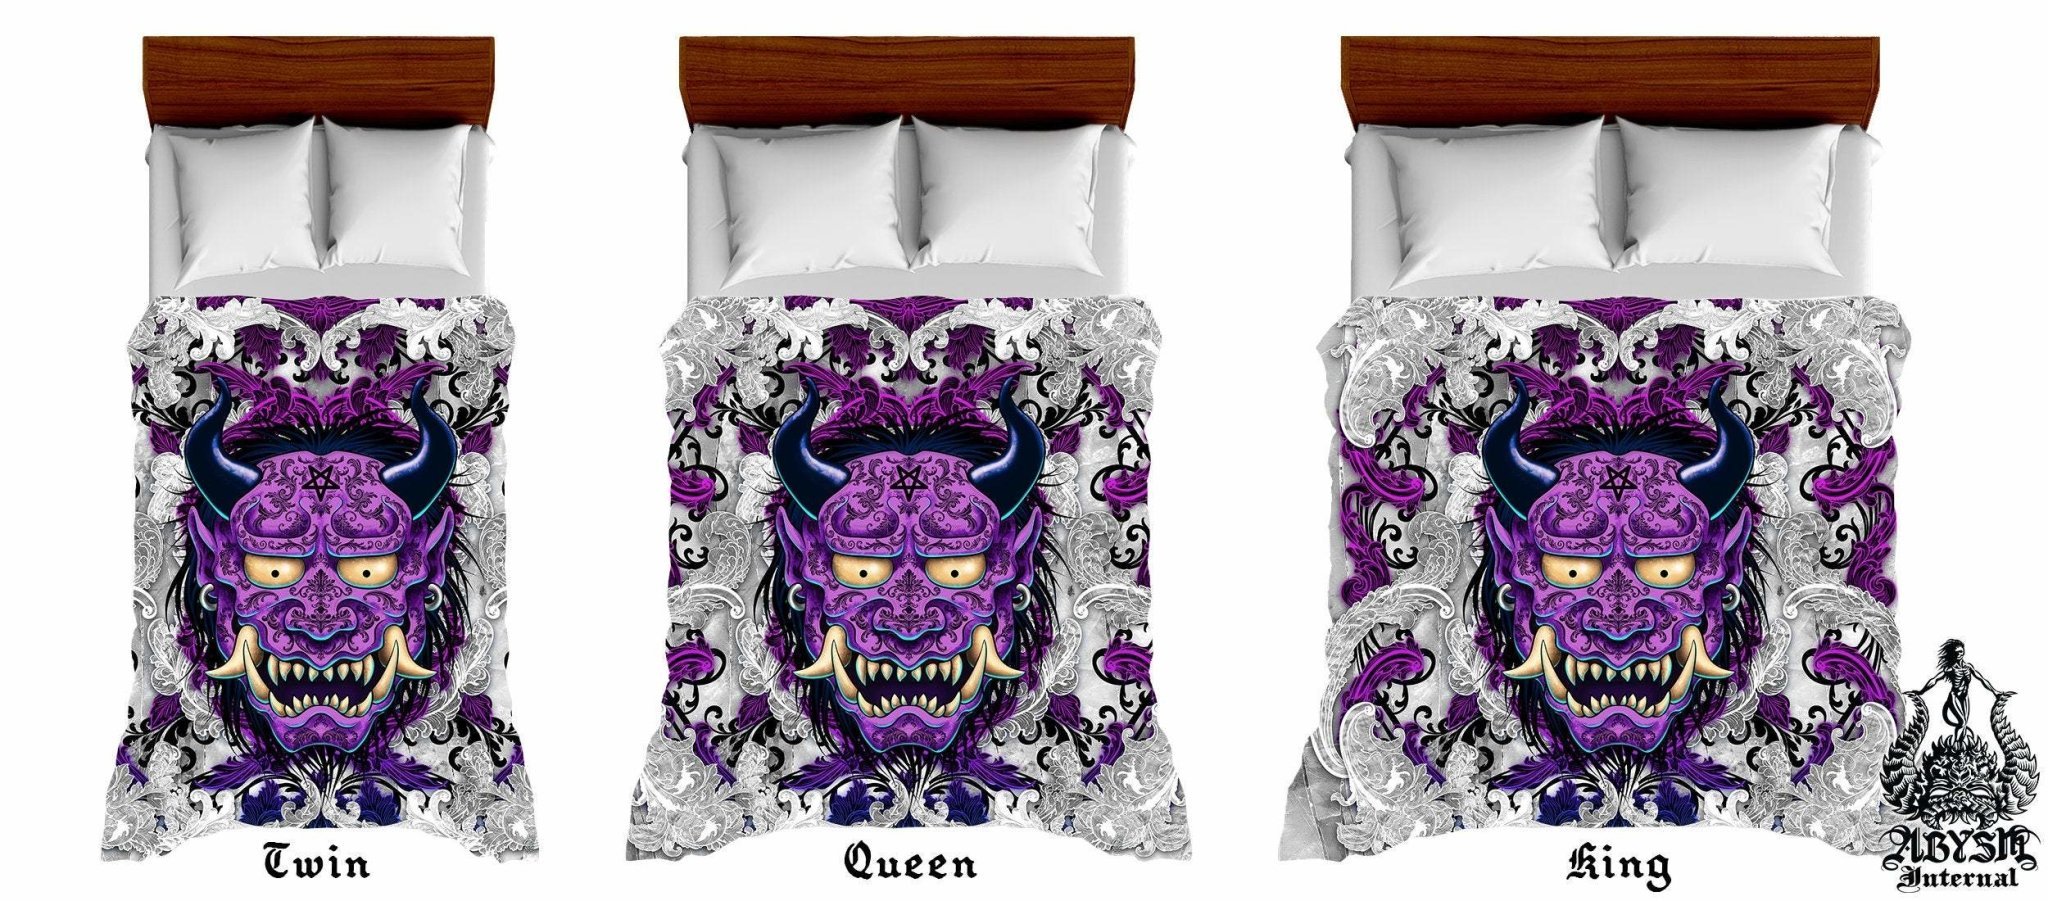 Whimsigoth Bedding Set, Comforter or Duvet, Japanese Oni Demon, Pastel Goth Bed Cover, Bedroom Decor, King, Queen & Twin Size - White and Purple, 2 Colors - Abysm Internal